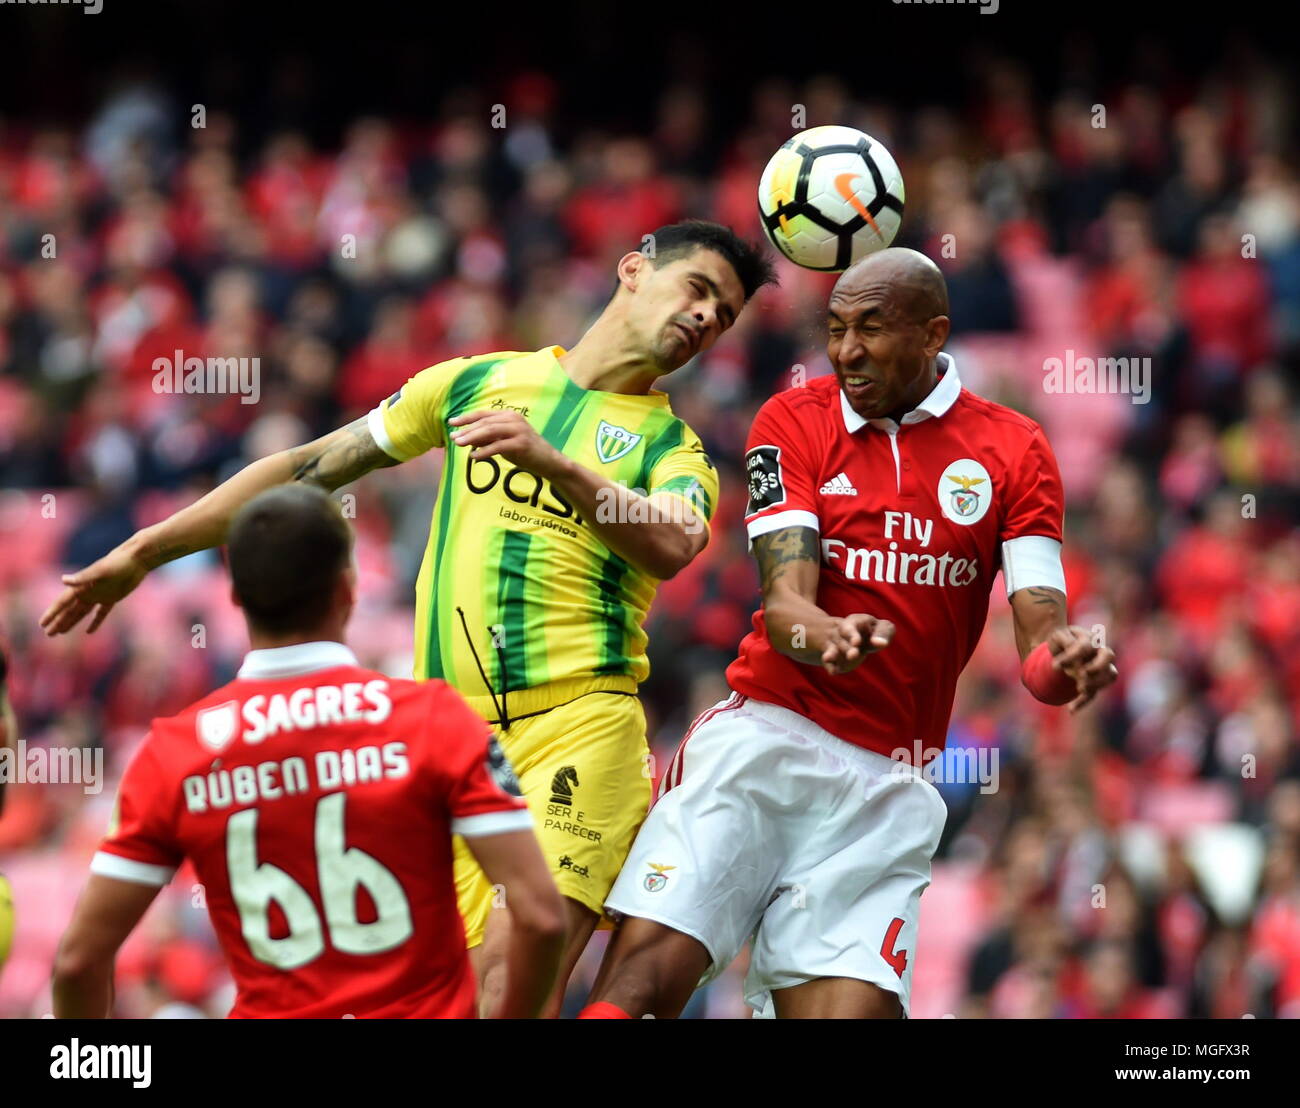 Lisbon, Portugal. 28th Apr, 2018. Luisao (R) of Benfica vies with Ricardo Costa of Tondela during Portuguese League soccer match between SL Benfica and CD Tondela in Lisbon, Portugal, April 28, 2018. Todela won 3-2. Credit: Zhang Yadong/Xinhua/Alamy Live News Stock Photo